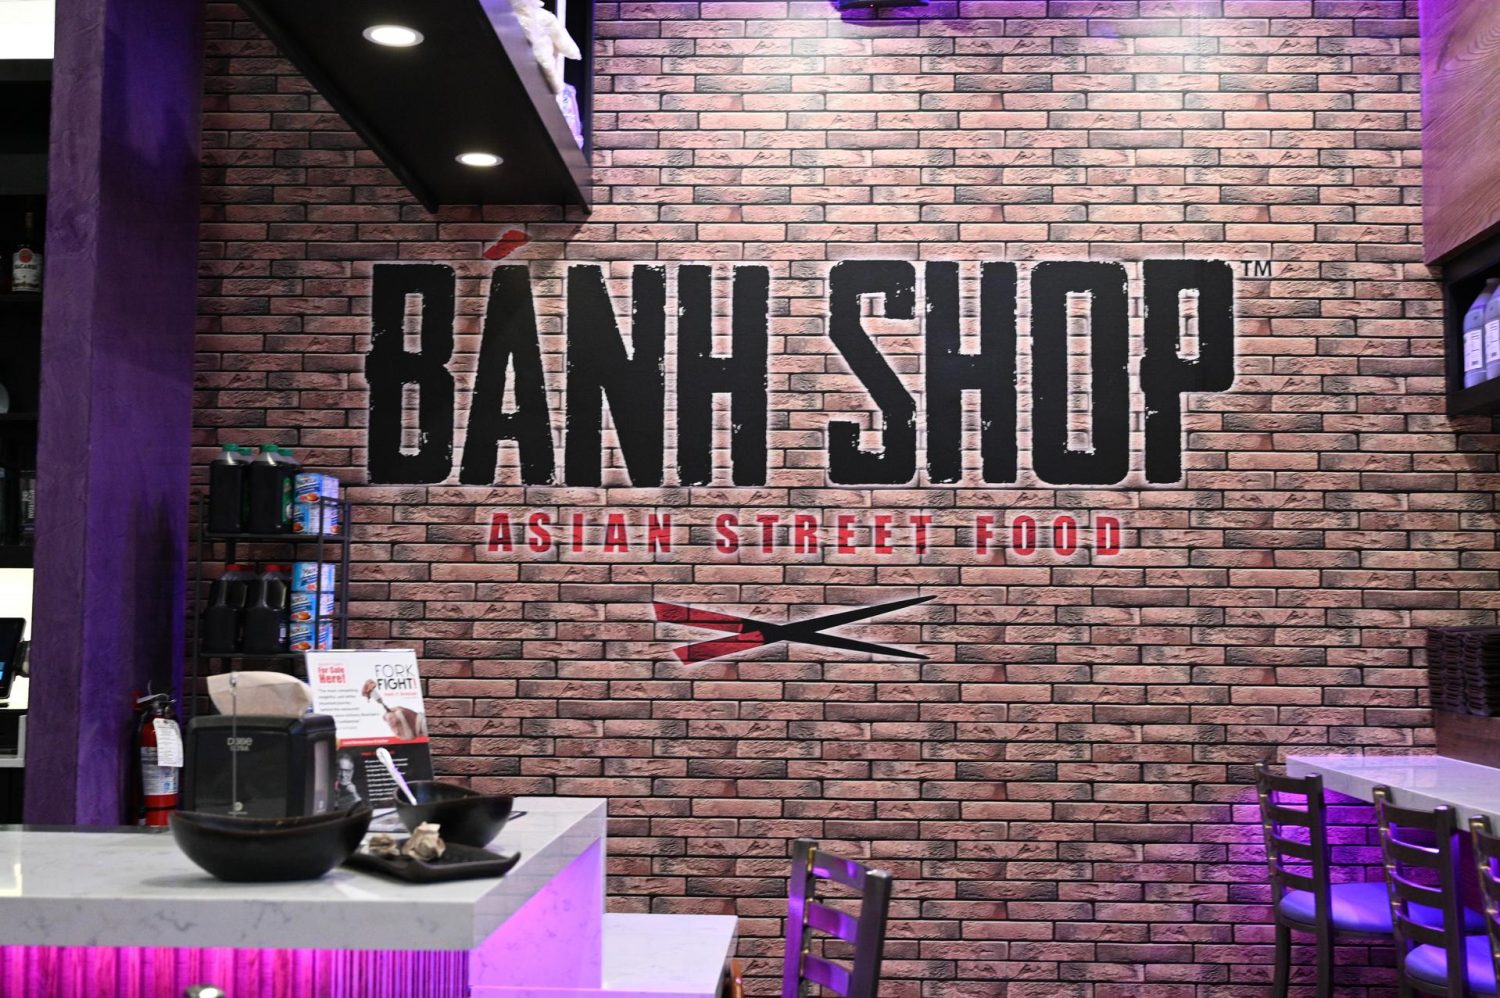 Banh Shop features the famous Vietnamese Banh Mi, wok bowls, Asian-style soups and salads. (Cecilia Le/Staff Writer)